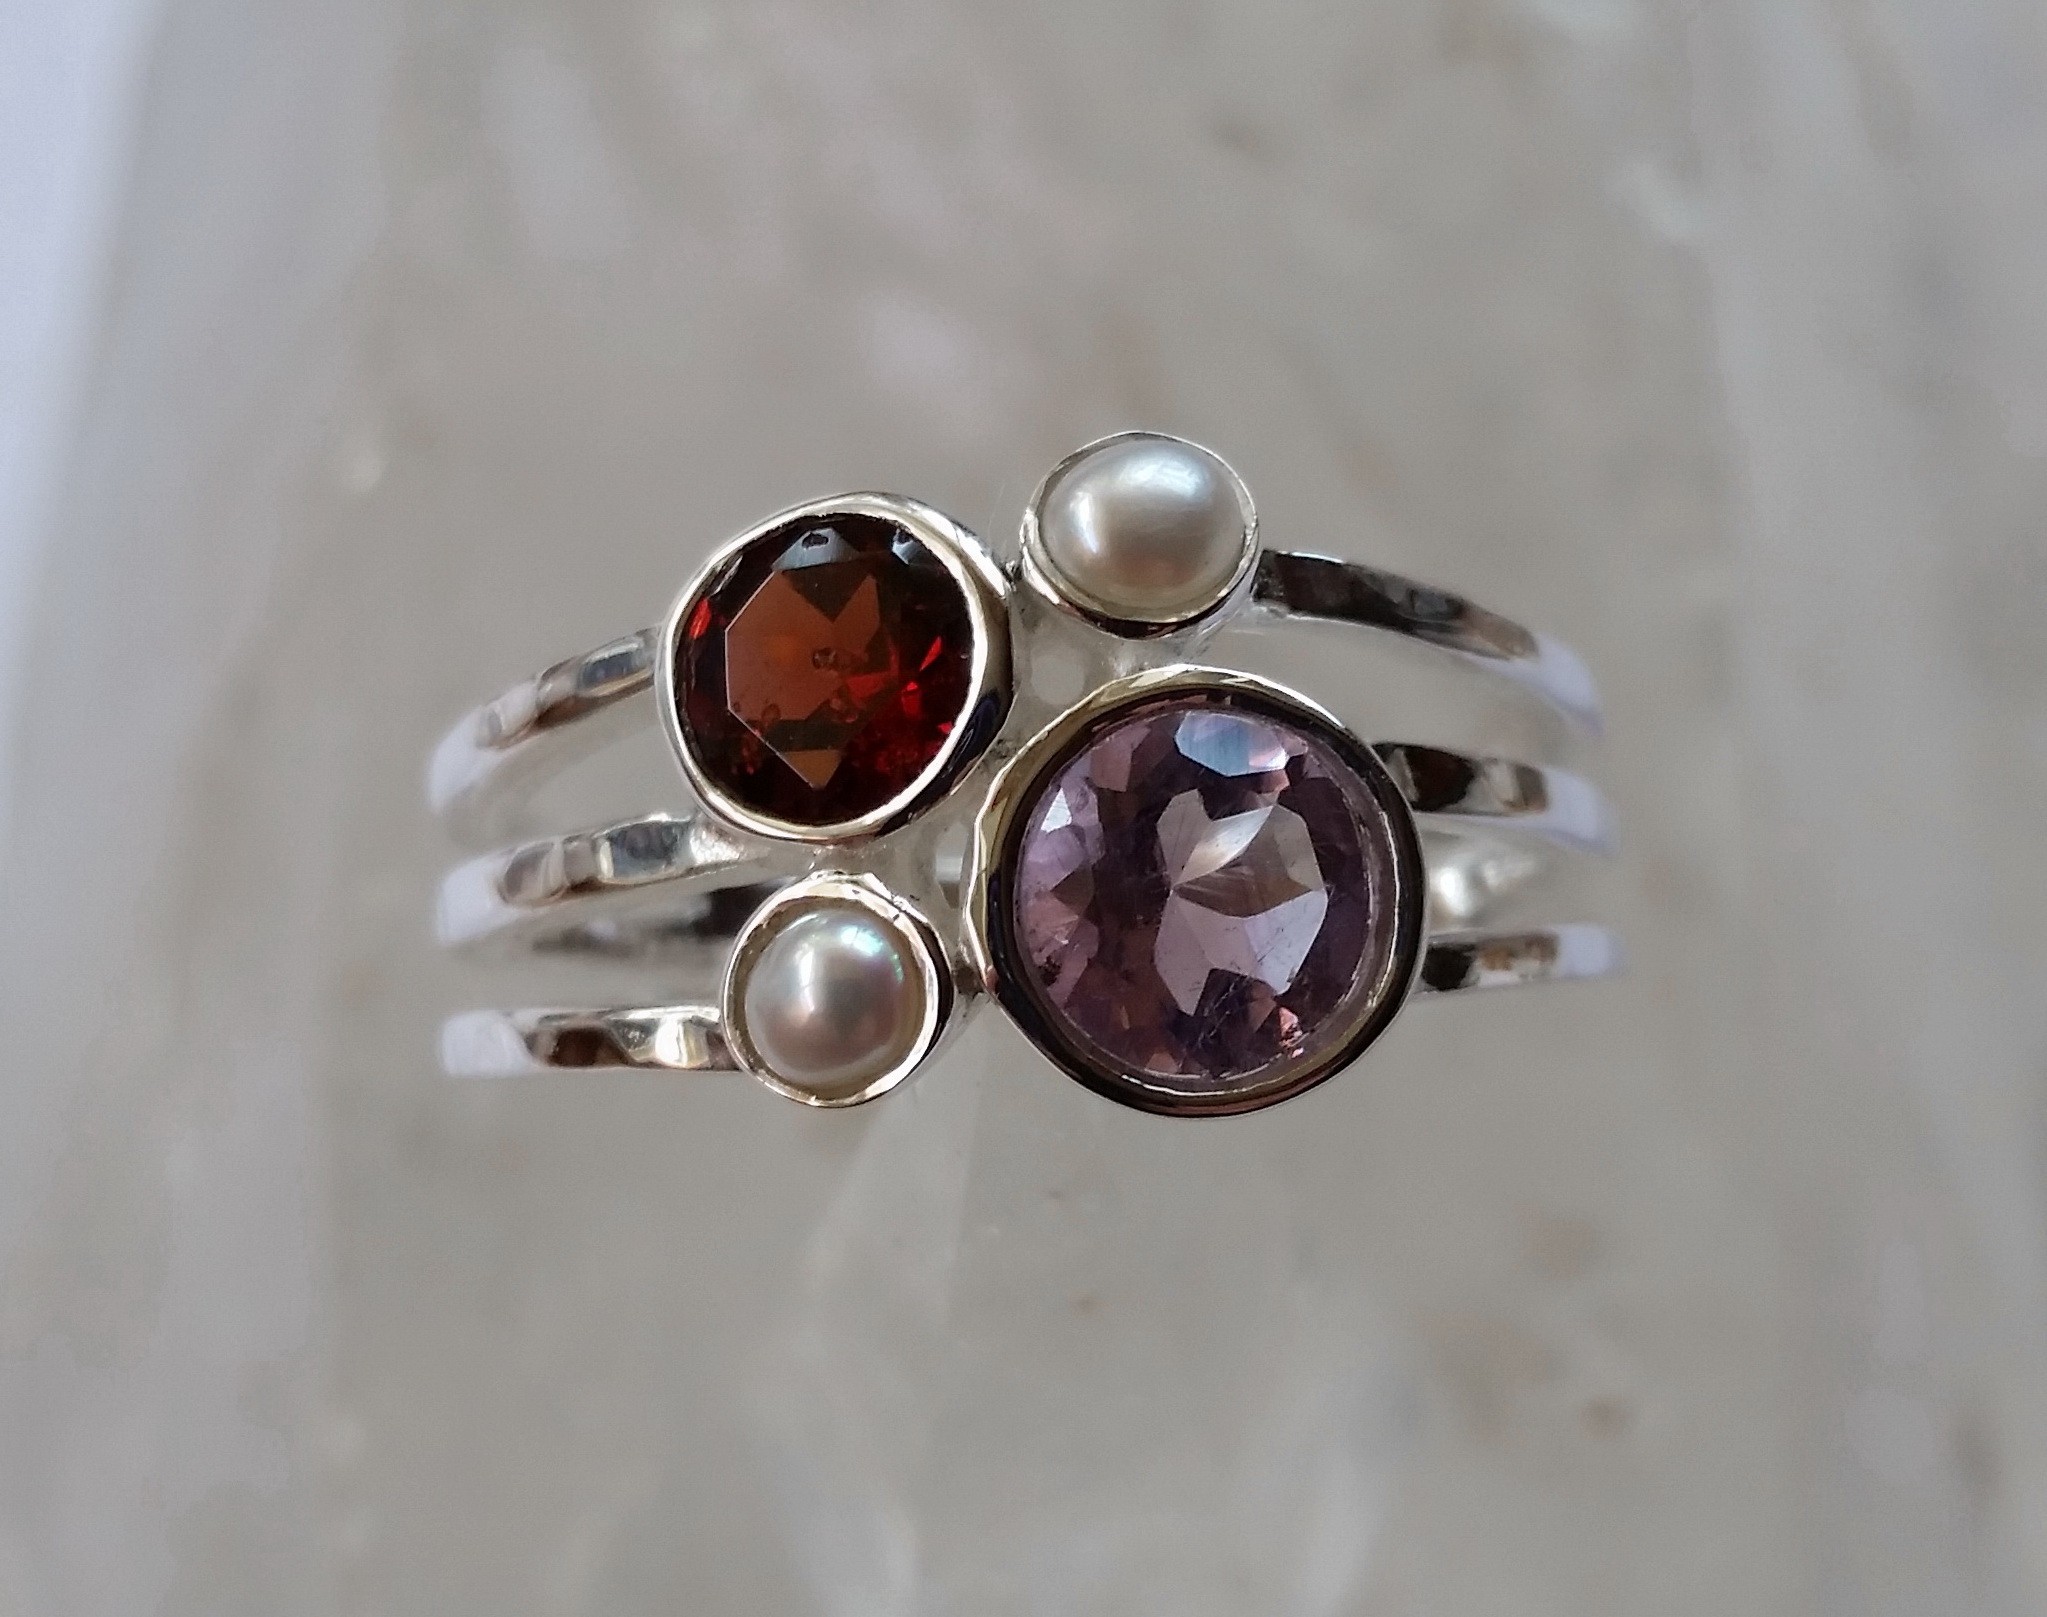 All genuine gems set into 925 sterling silver ring.